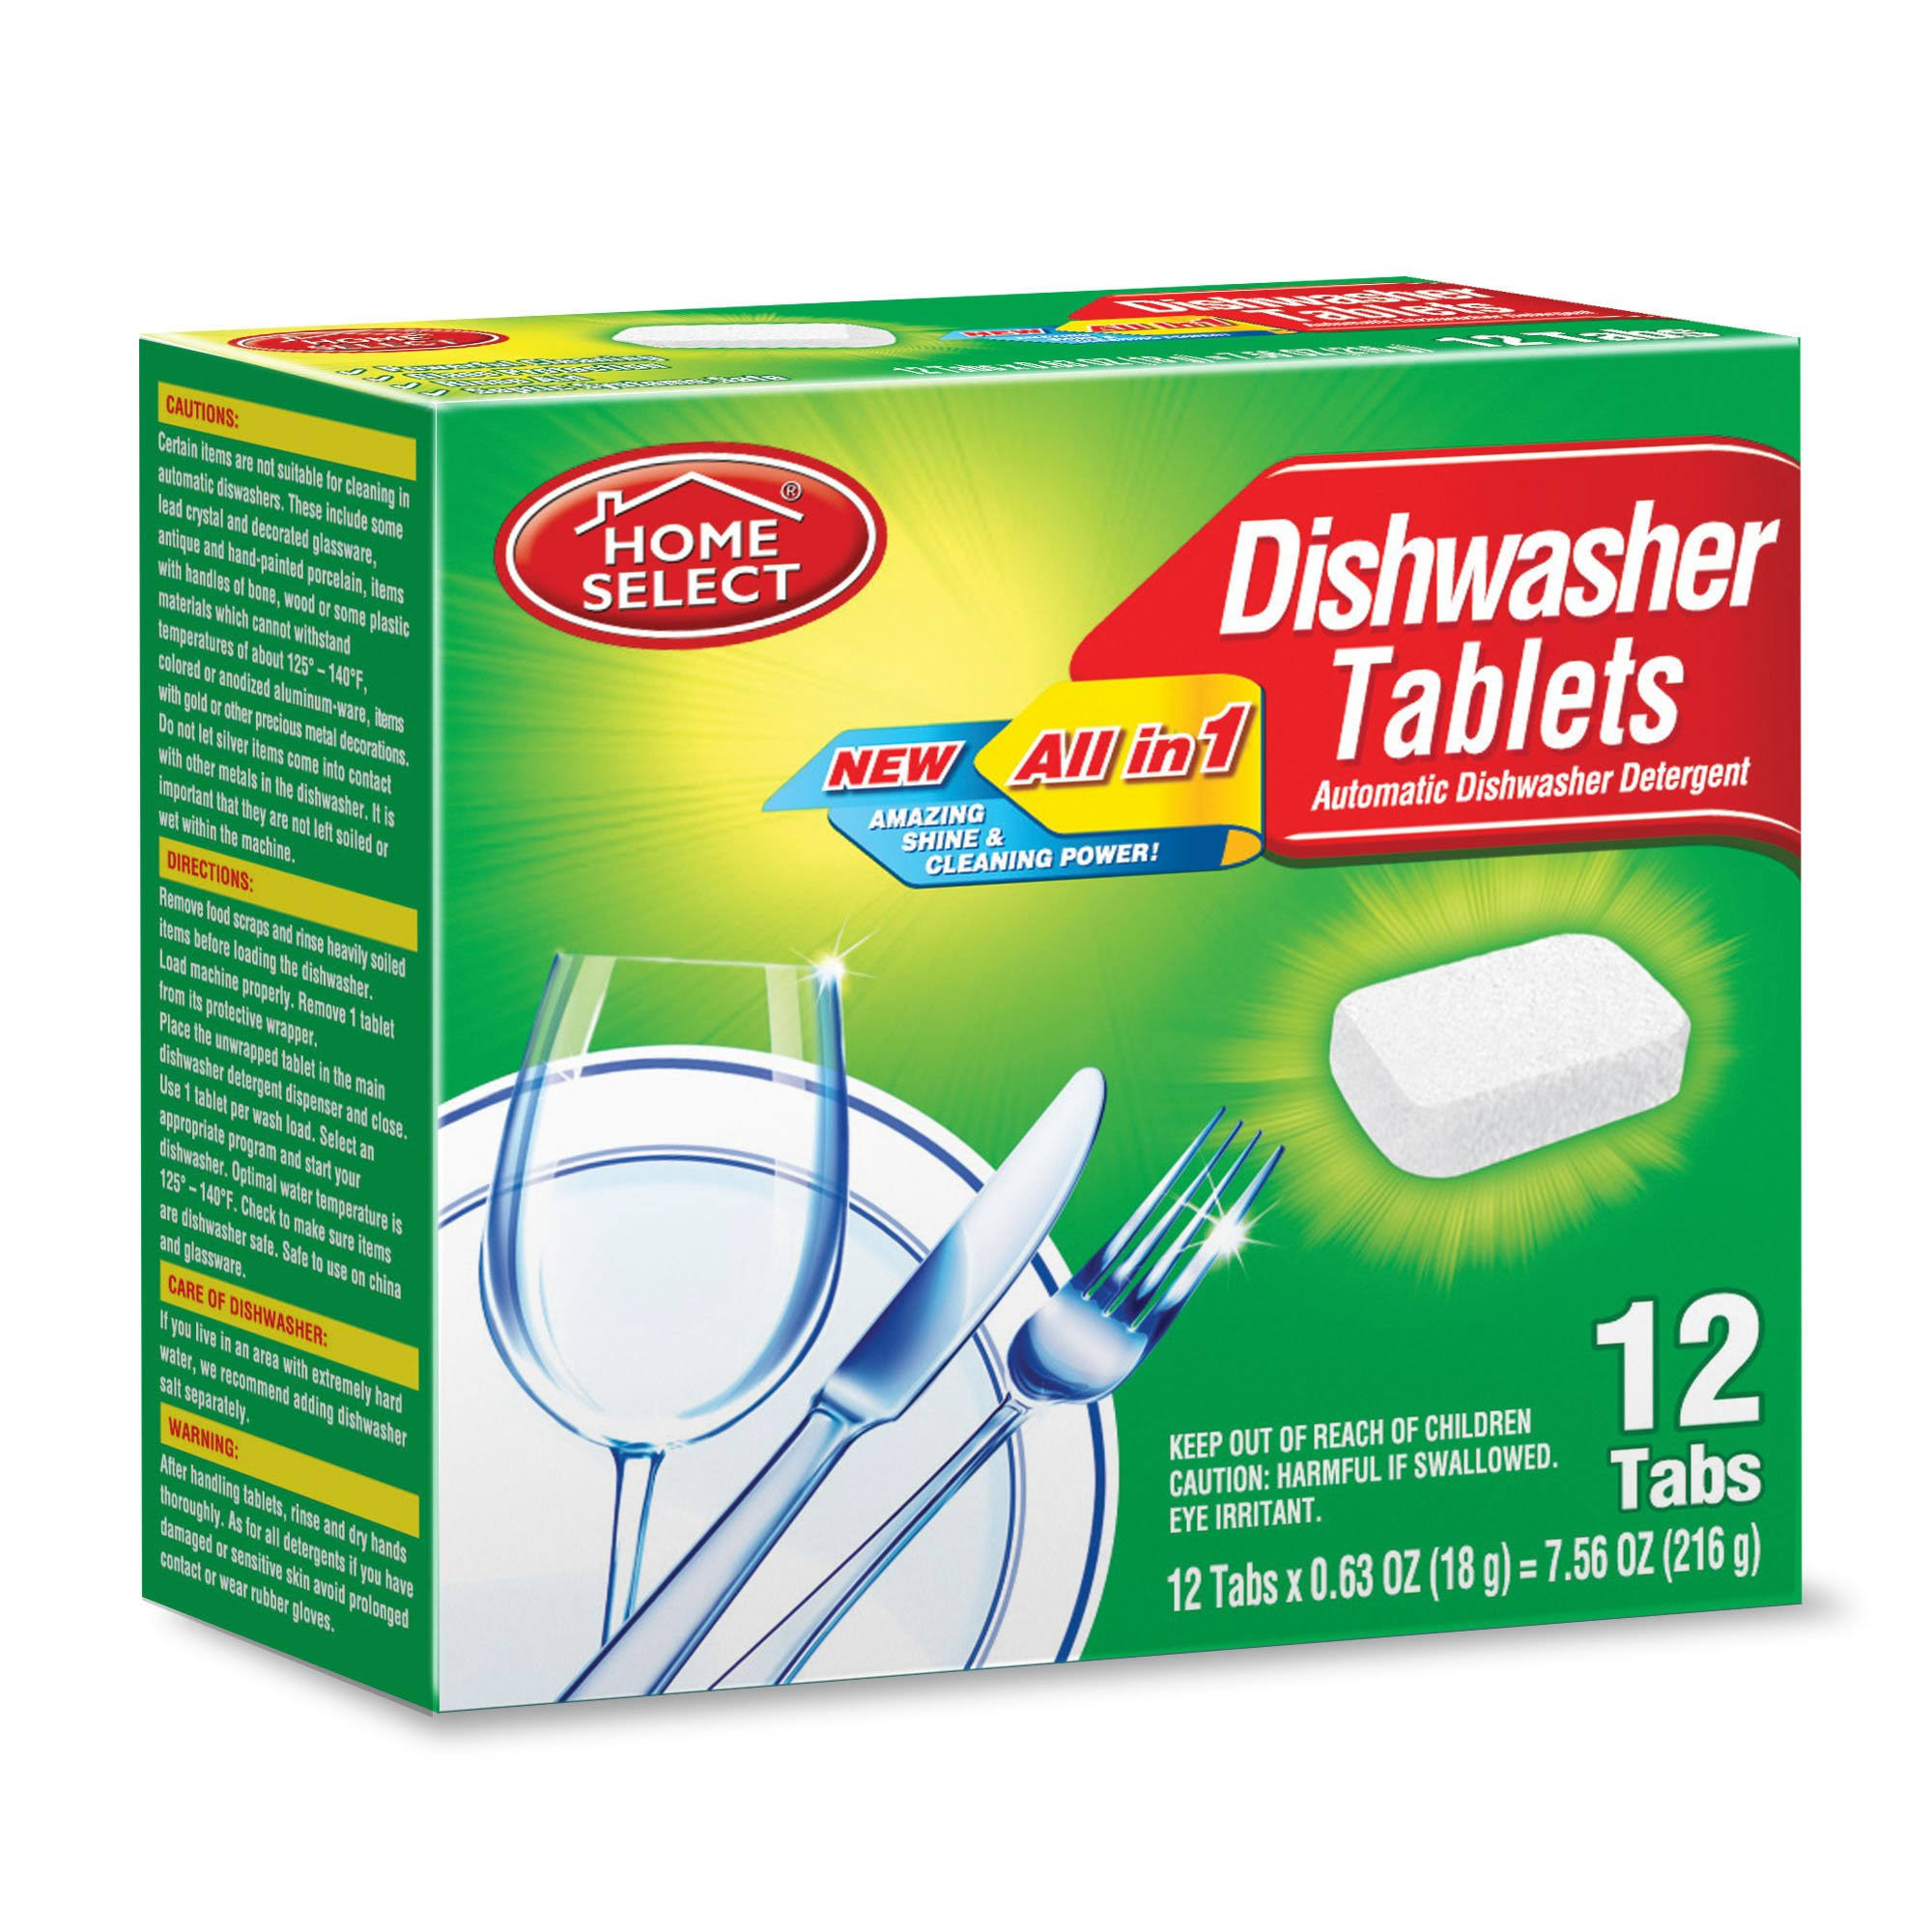 Home Select Dishwasher Tablets, 12 Tabs